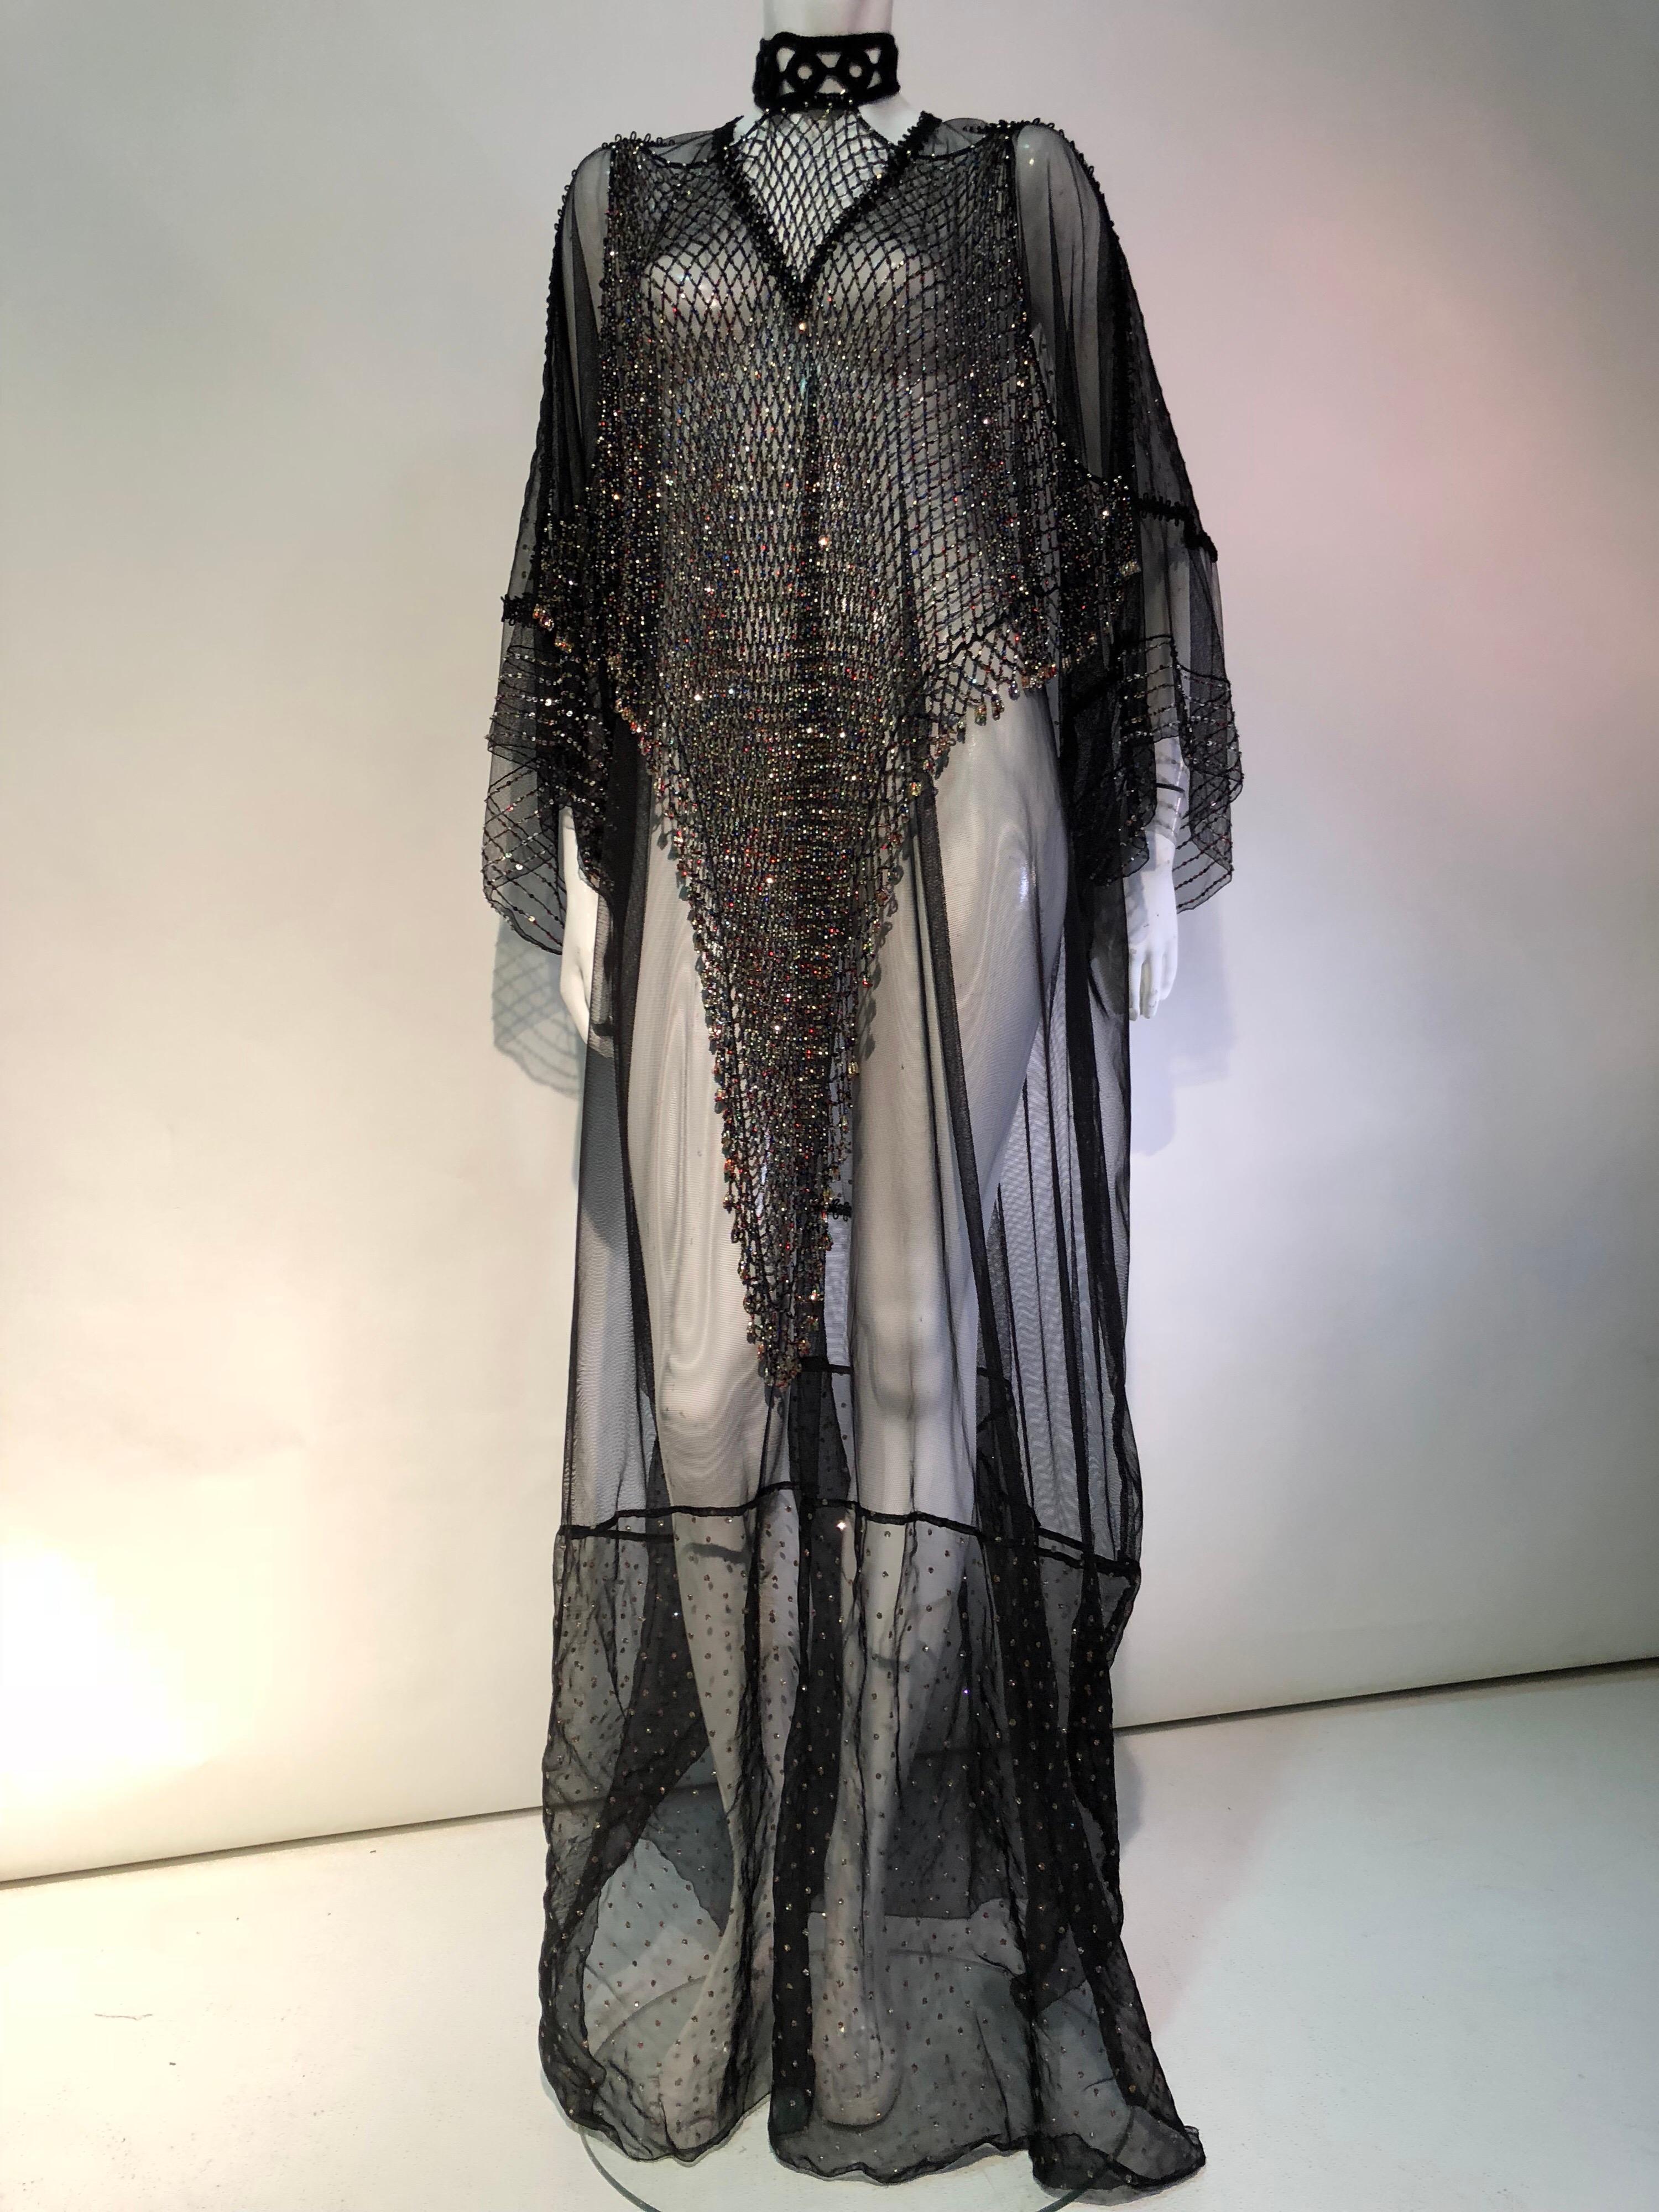 Featured here is a glorious custom made black net and vintage speckled sheer fabric Kaftan designed with a dramatic beaded net bib front choker necklace that ties at the neck and is attached to the Kaftan at the shoulders . Sequin and beaded sleeves